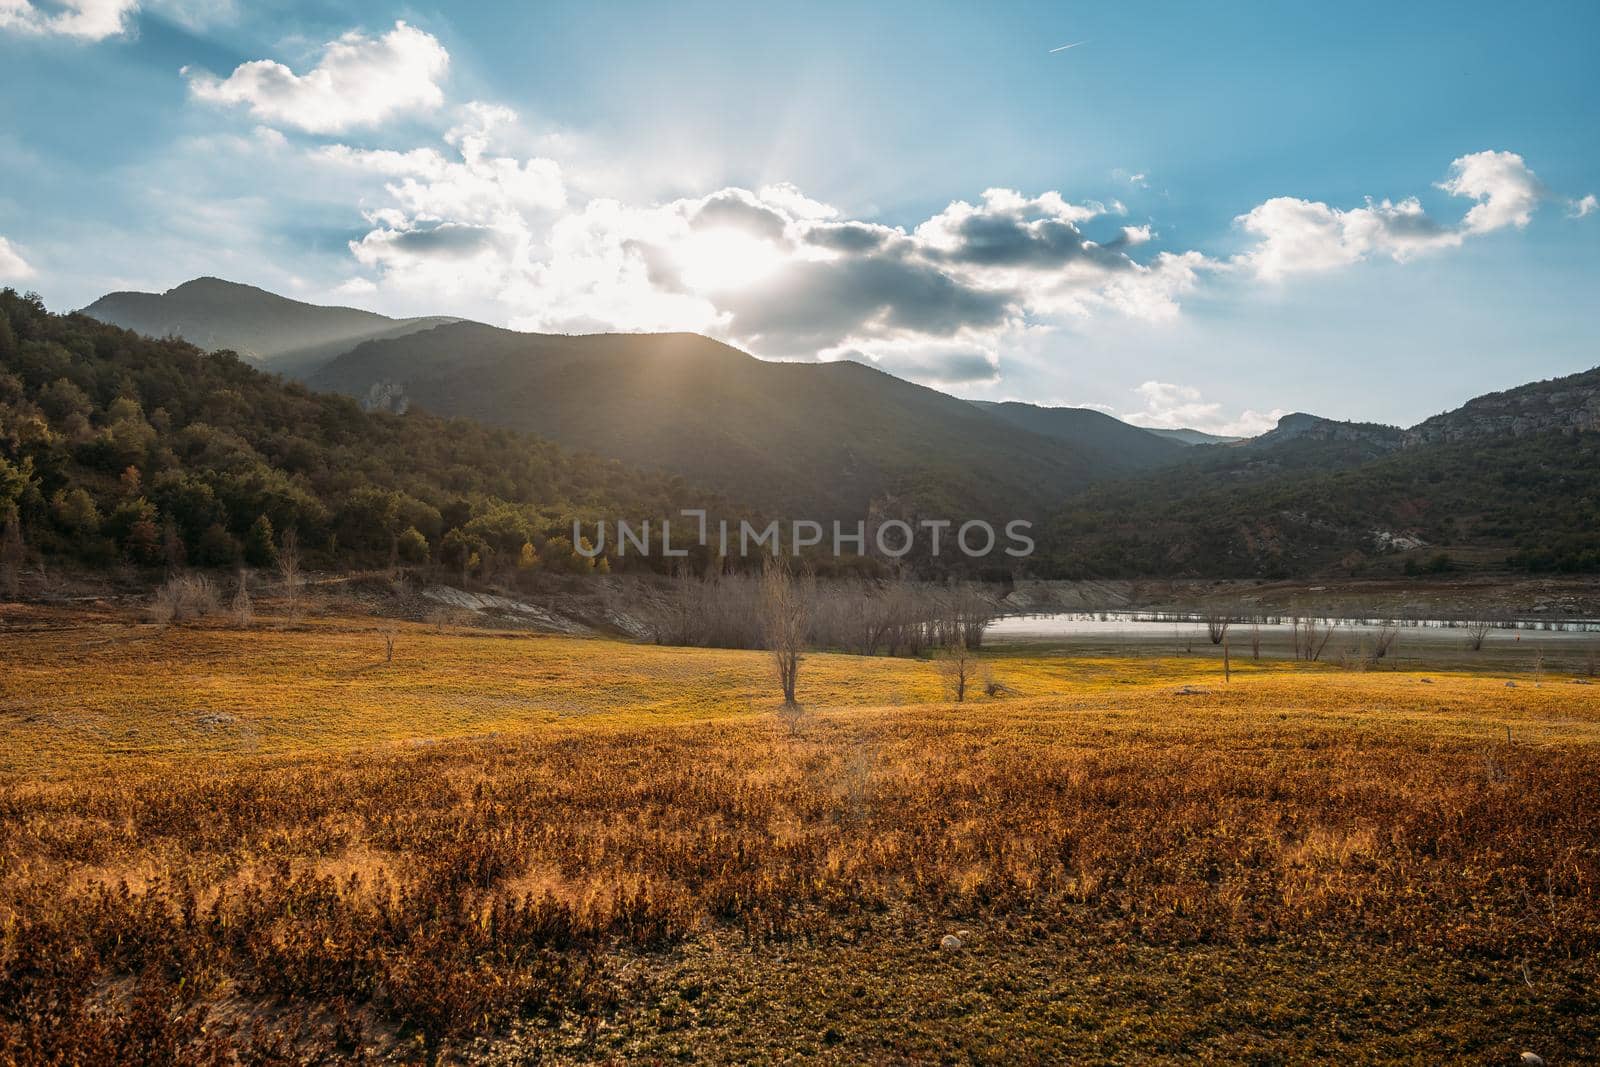 Dawn in the valley in autumn season with orange field and mountains around. Sun shines through the clouds on the blue sky.